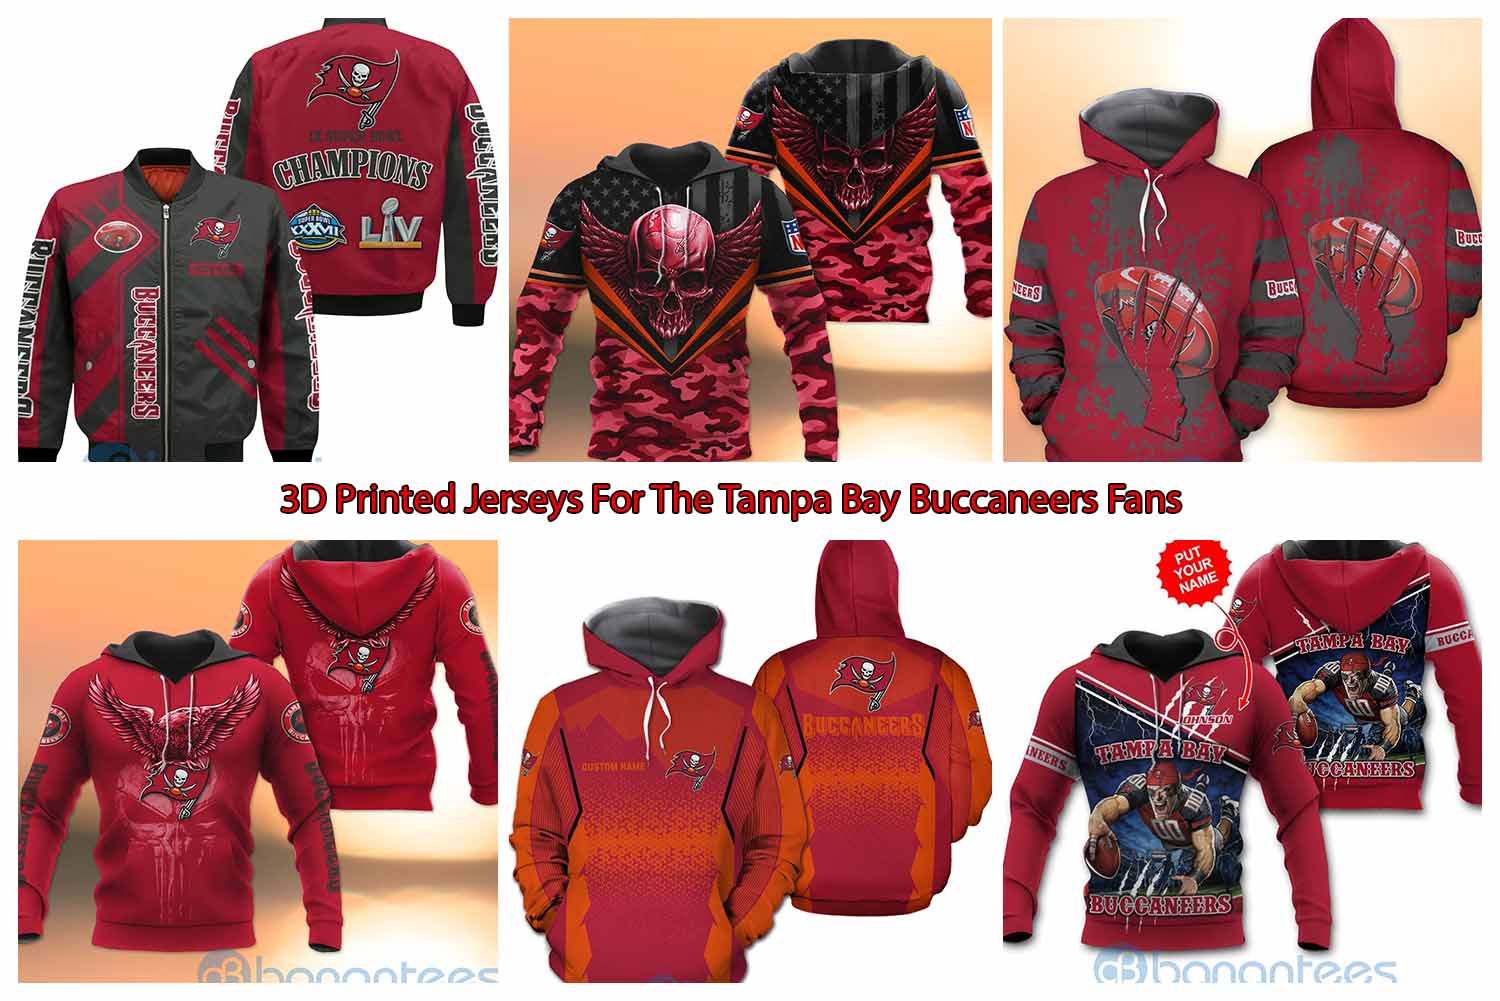 3D Printed Jerseys For The Tampa Bay Buccaneers Fans